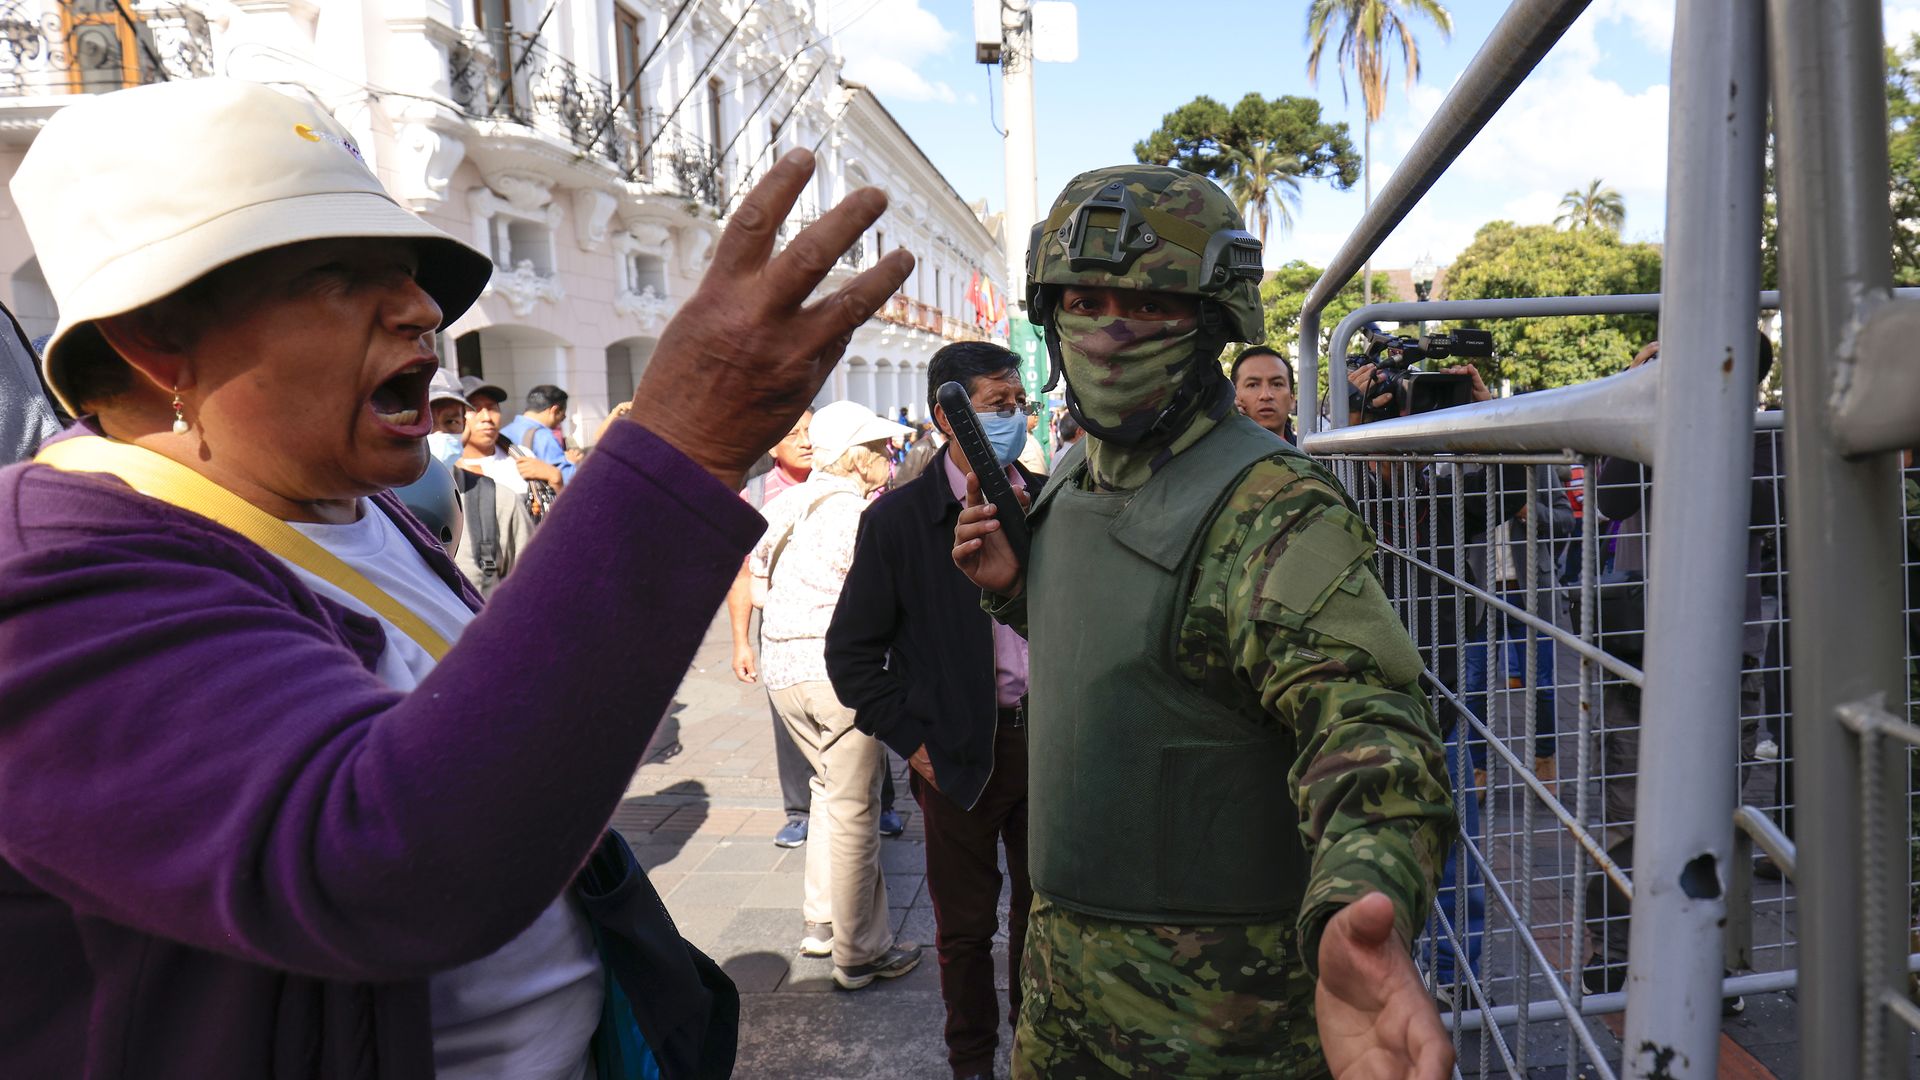 A woman wearing a bucket hat has her arm out and appears to be yelling next to a soldier in uniform outside government palace in Quito, Ecuador 